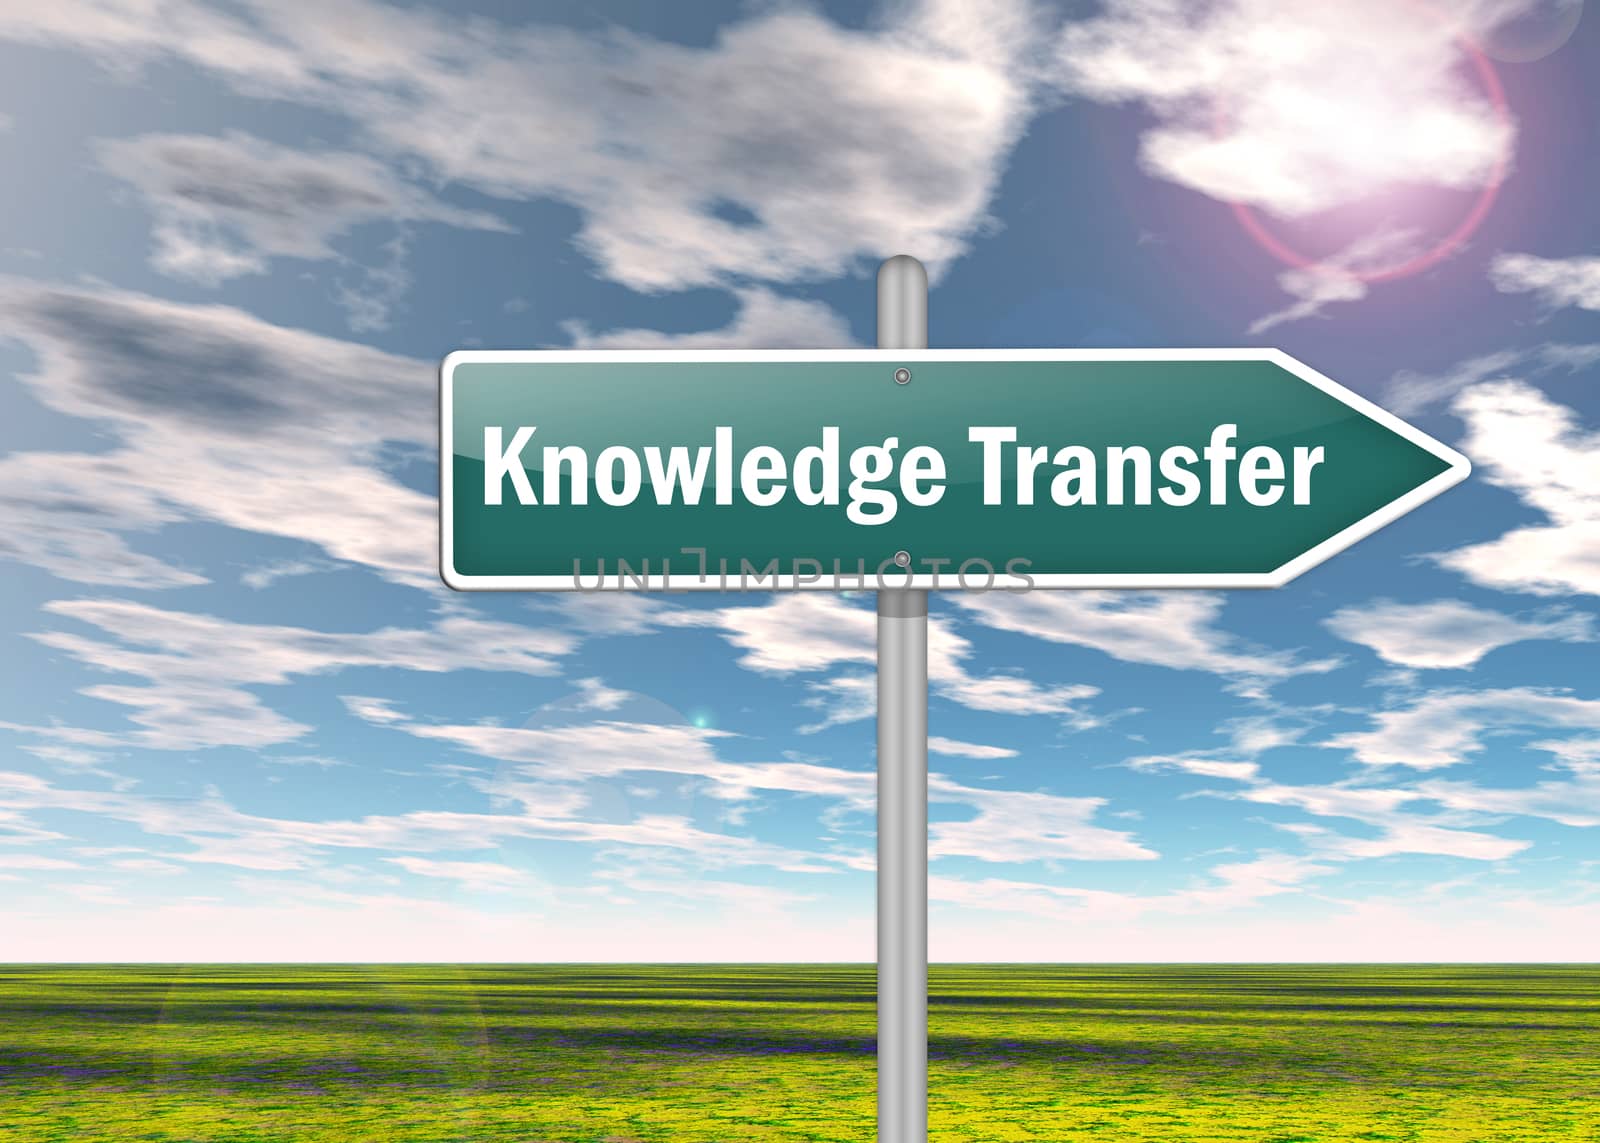 Signpost "Knowledge Transfer"